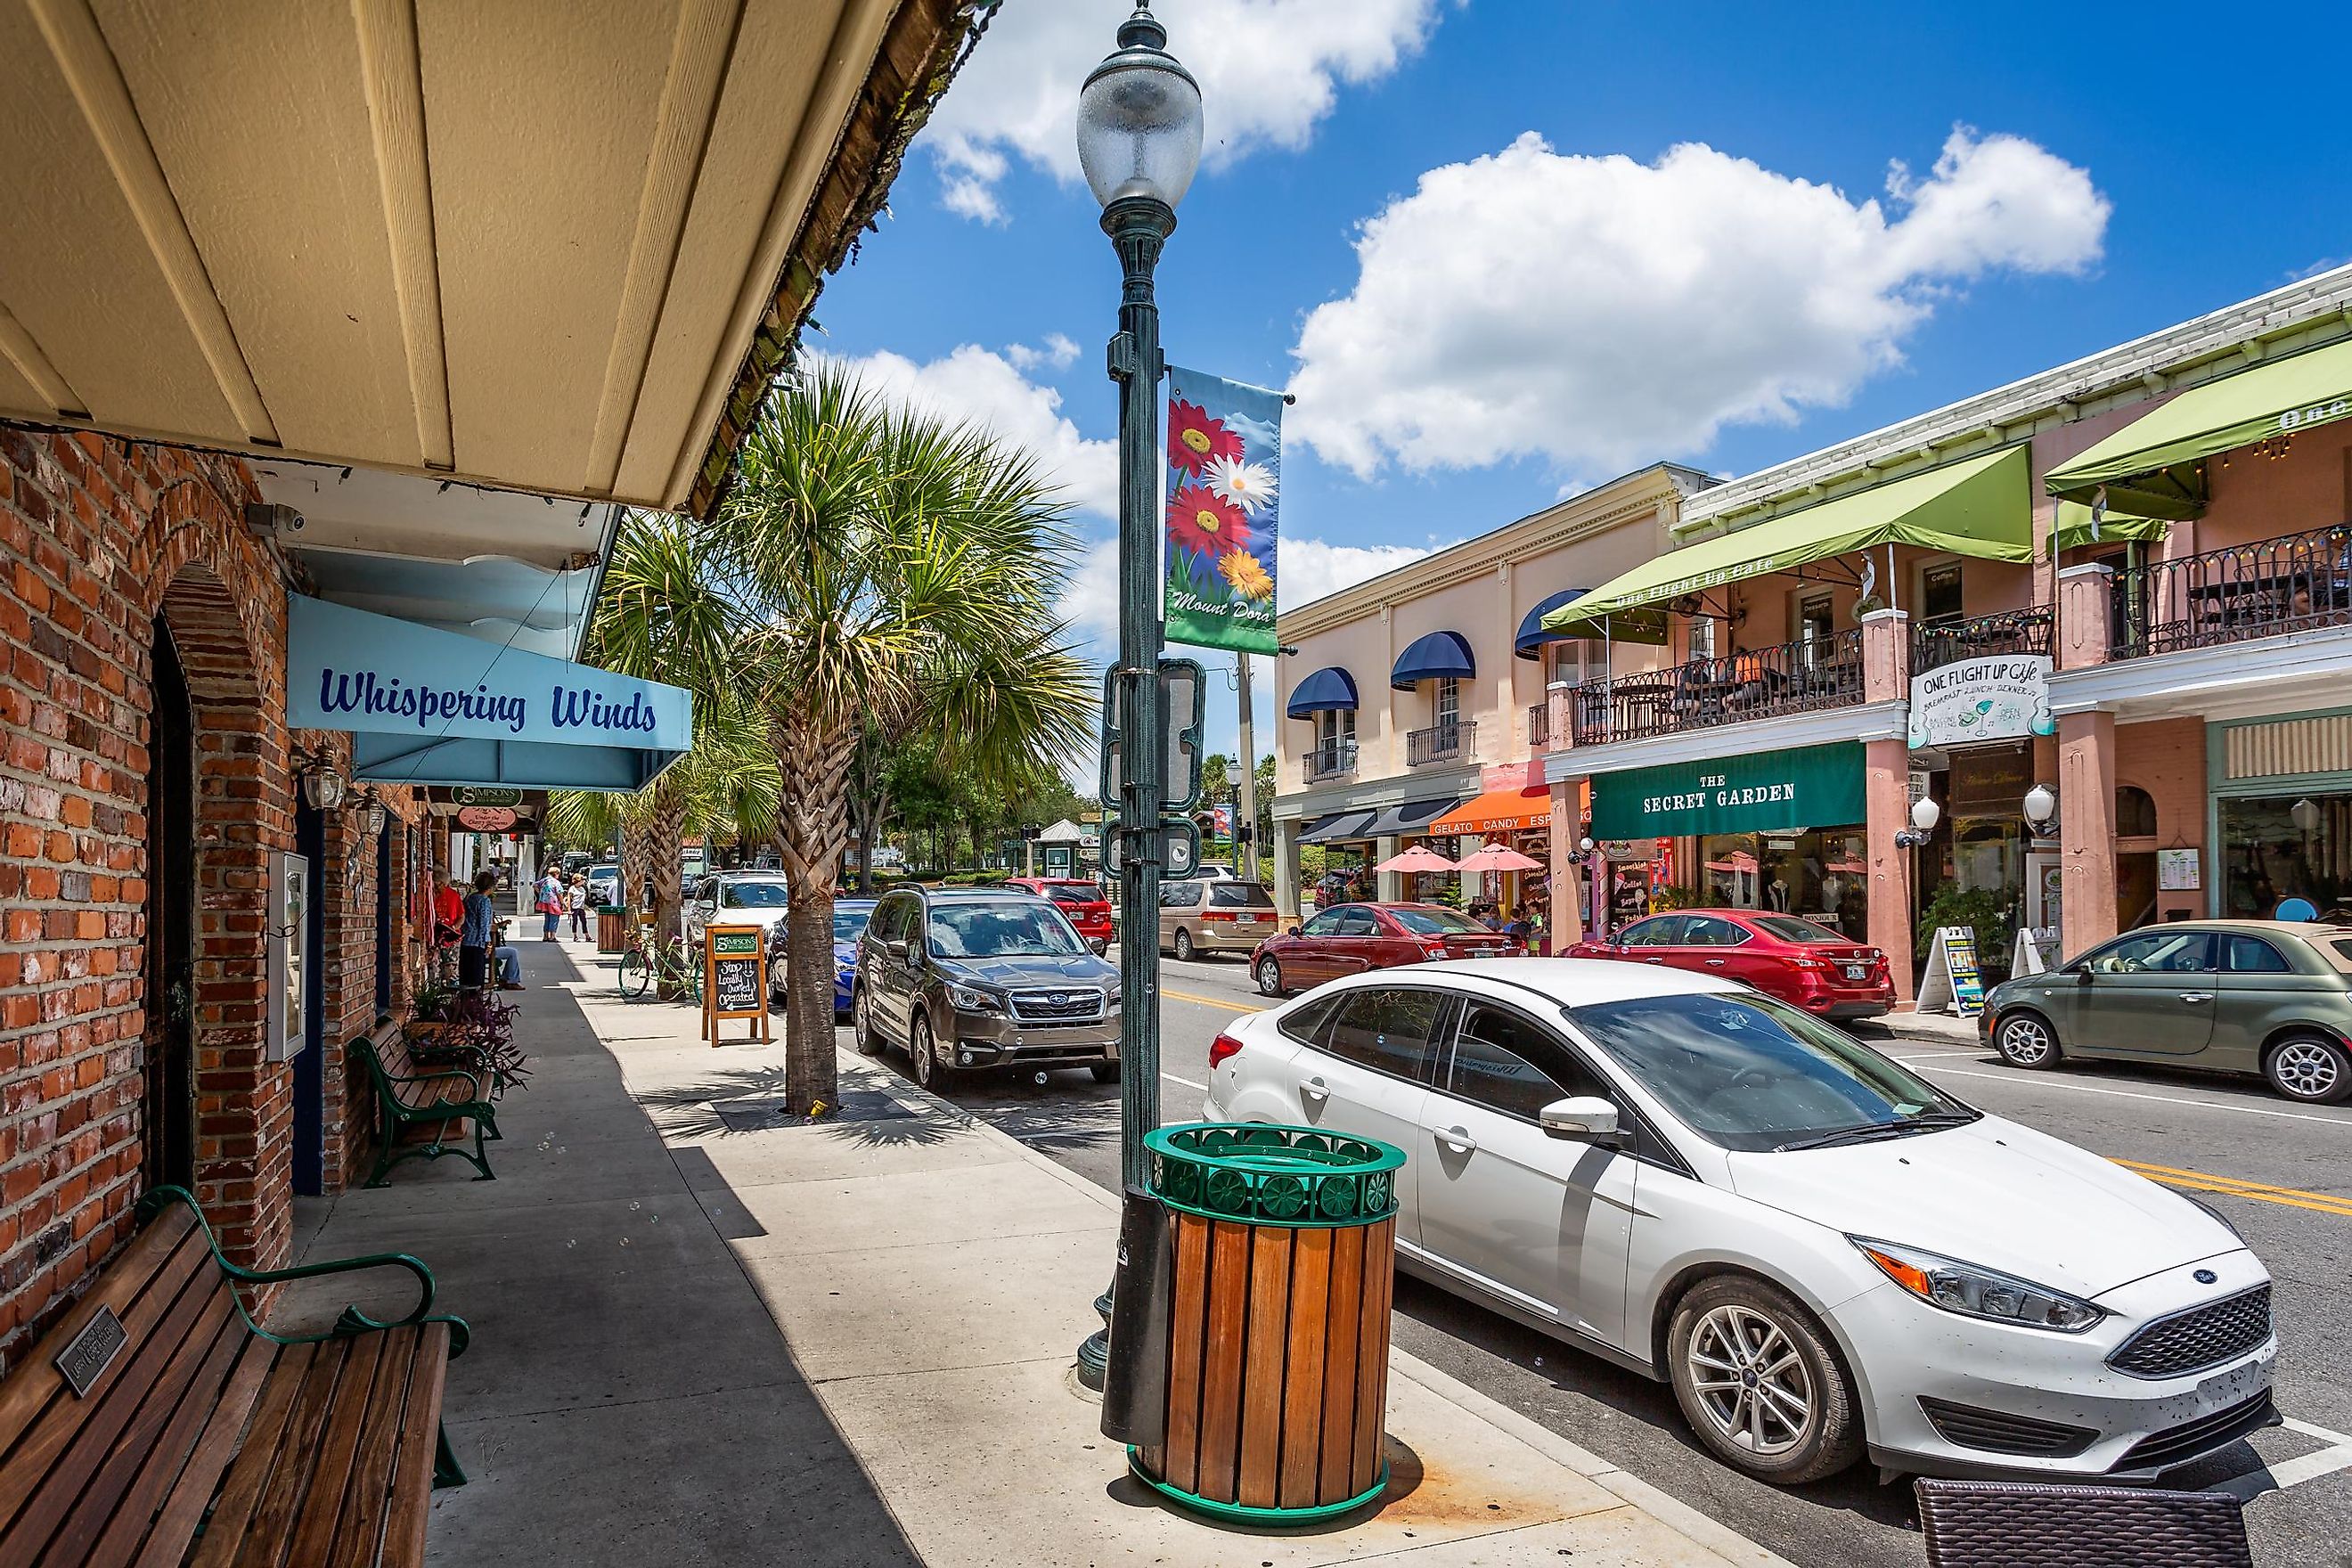 Downtown Mount Dora in Florida, USA on 23 May 2019